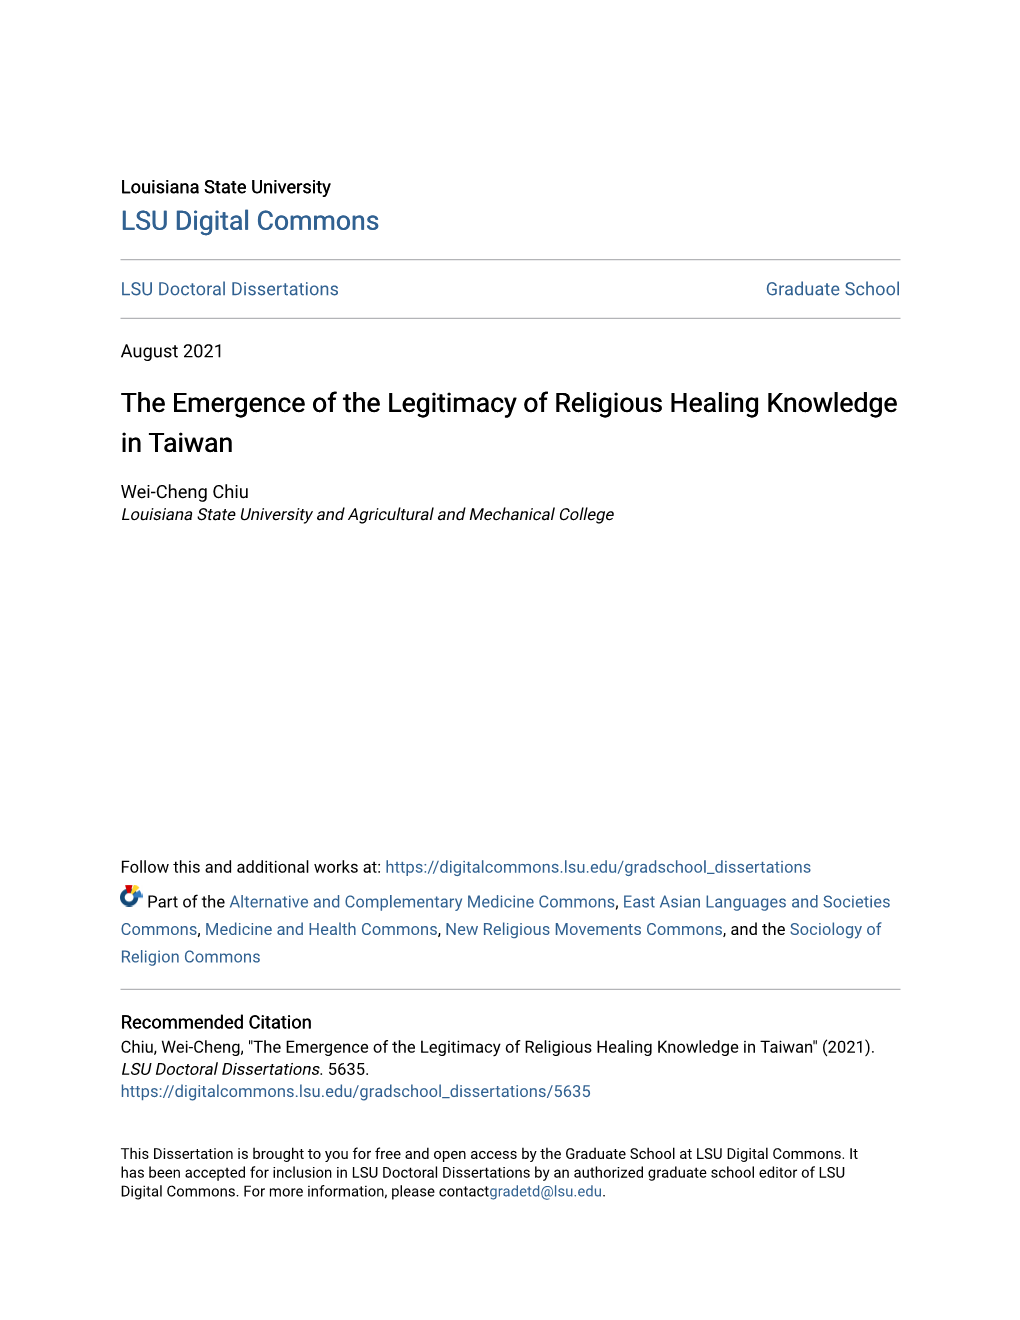 The Emergence of the Legitimacy of Religious Healing Knowledge in Taiwan